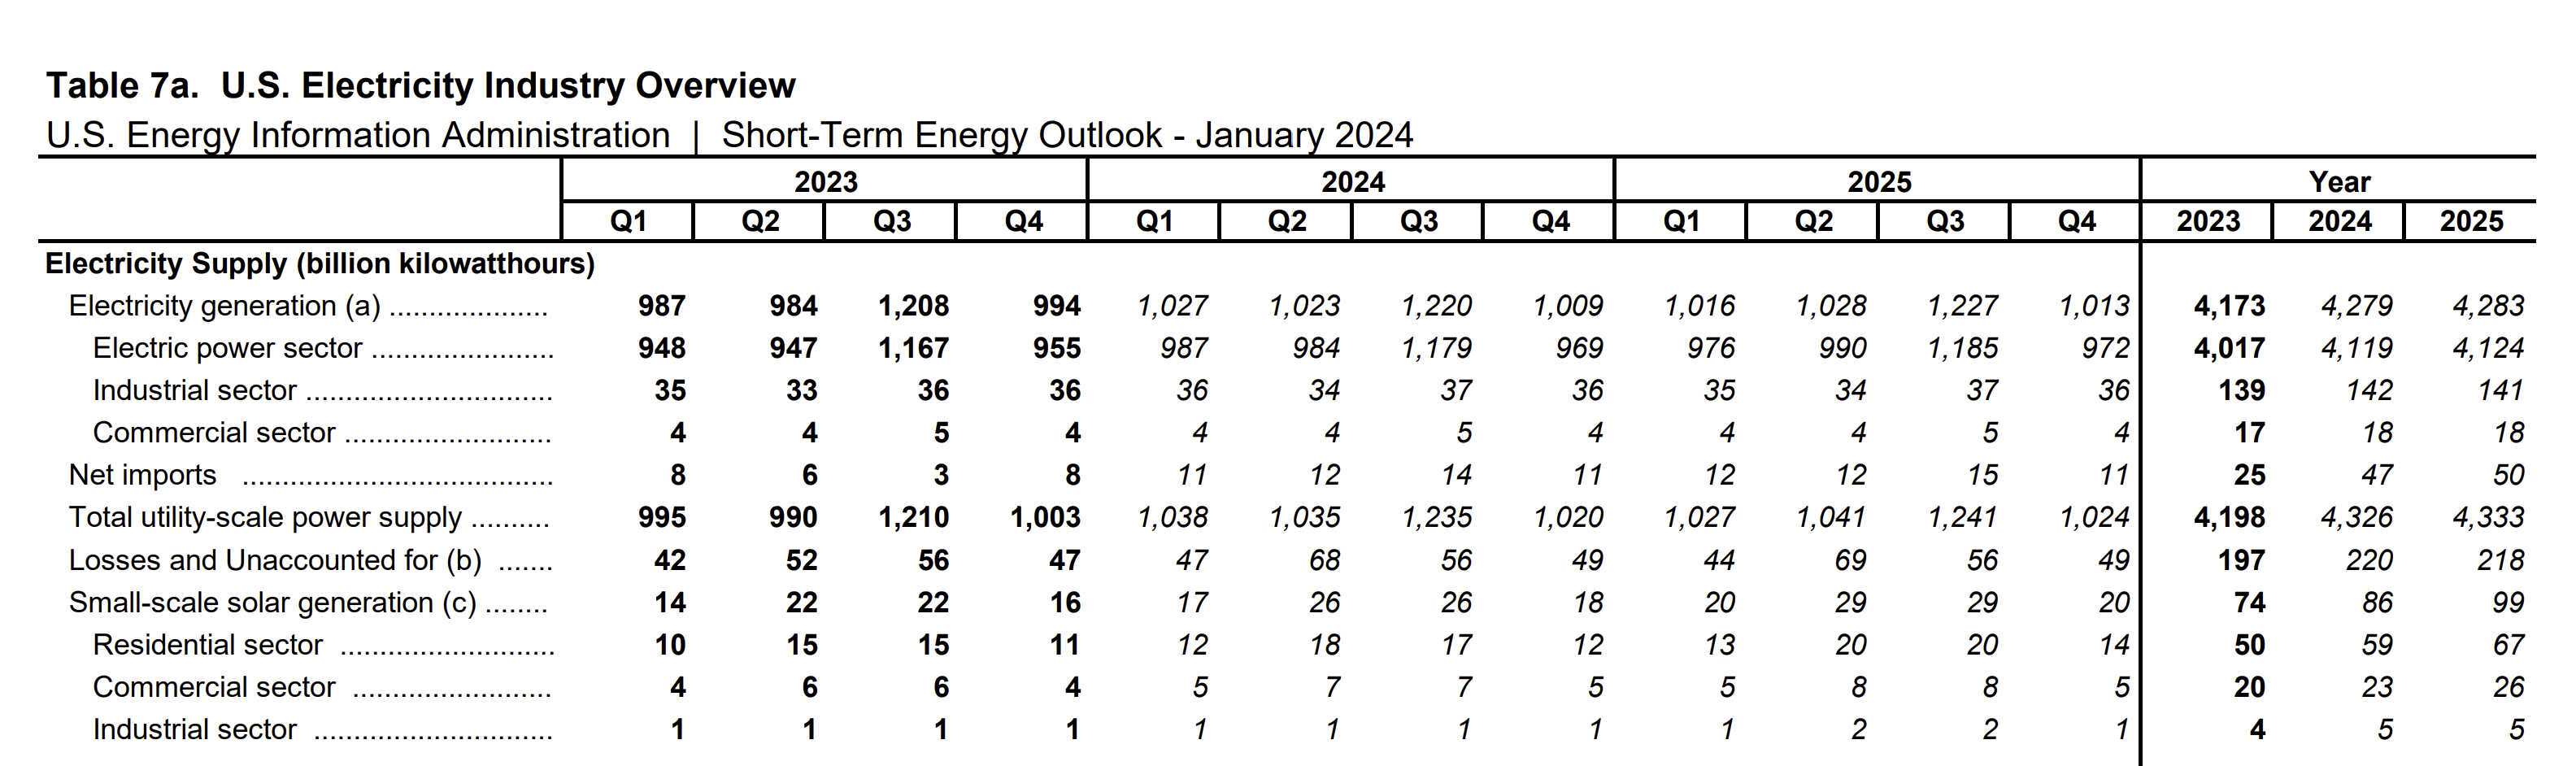 U.S. Electricity industry Overview